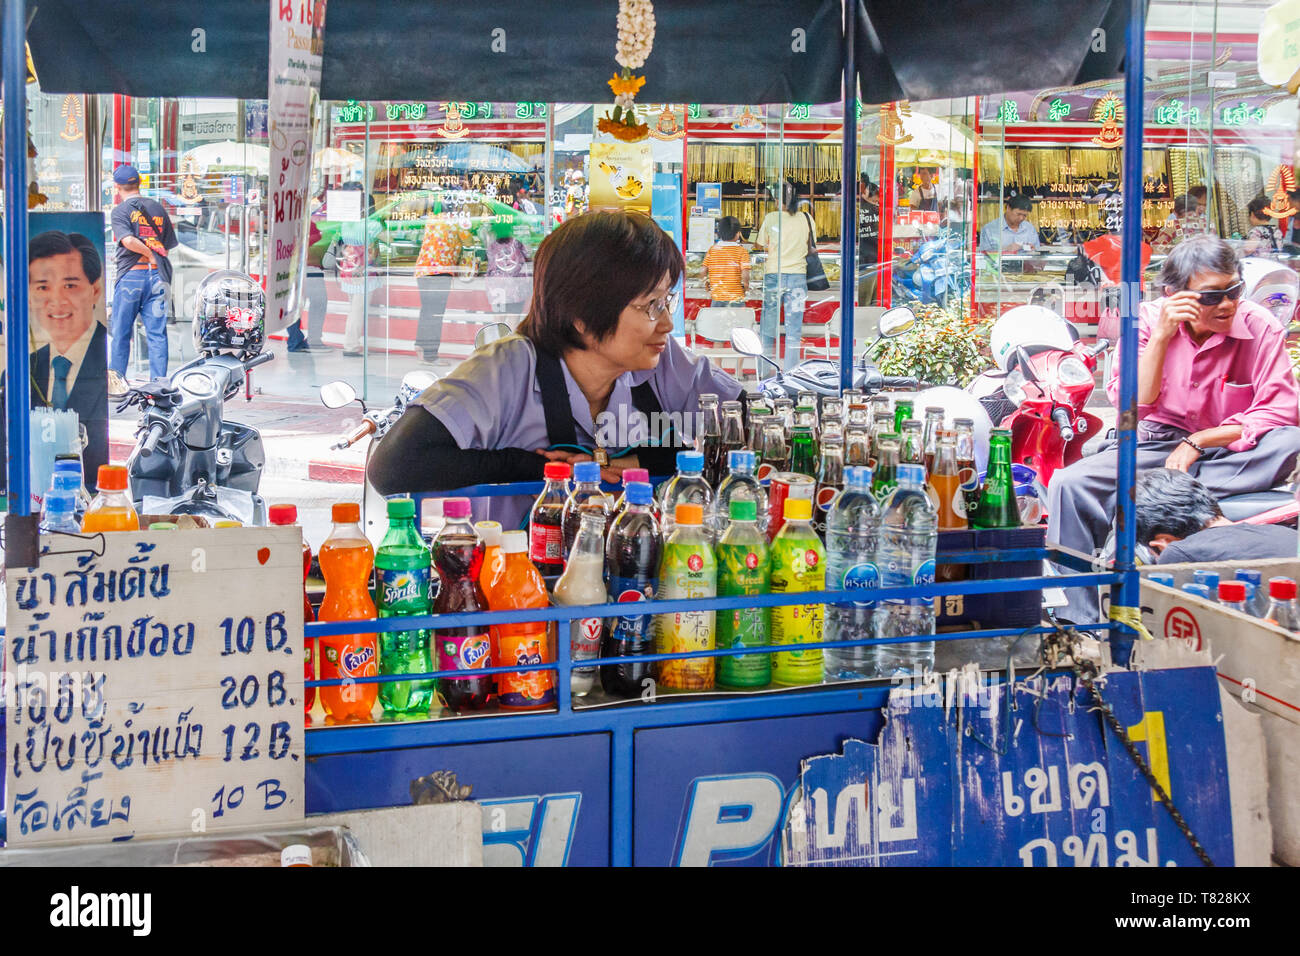 Bangkok, Thailand - April 21st 2011: Woman behind her mobile drinks stall in Chinatown. People often buy drinks as it is so hot. Stock Photo